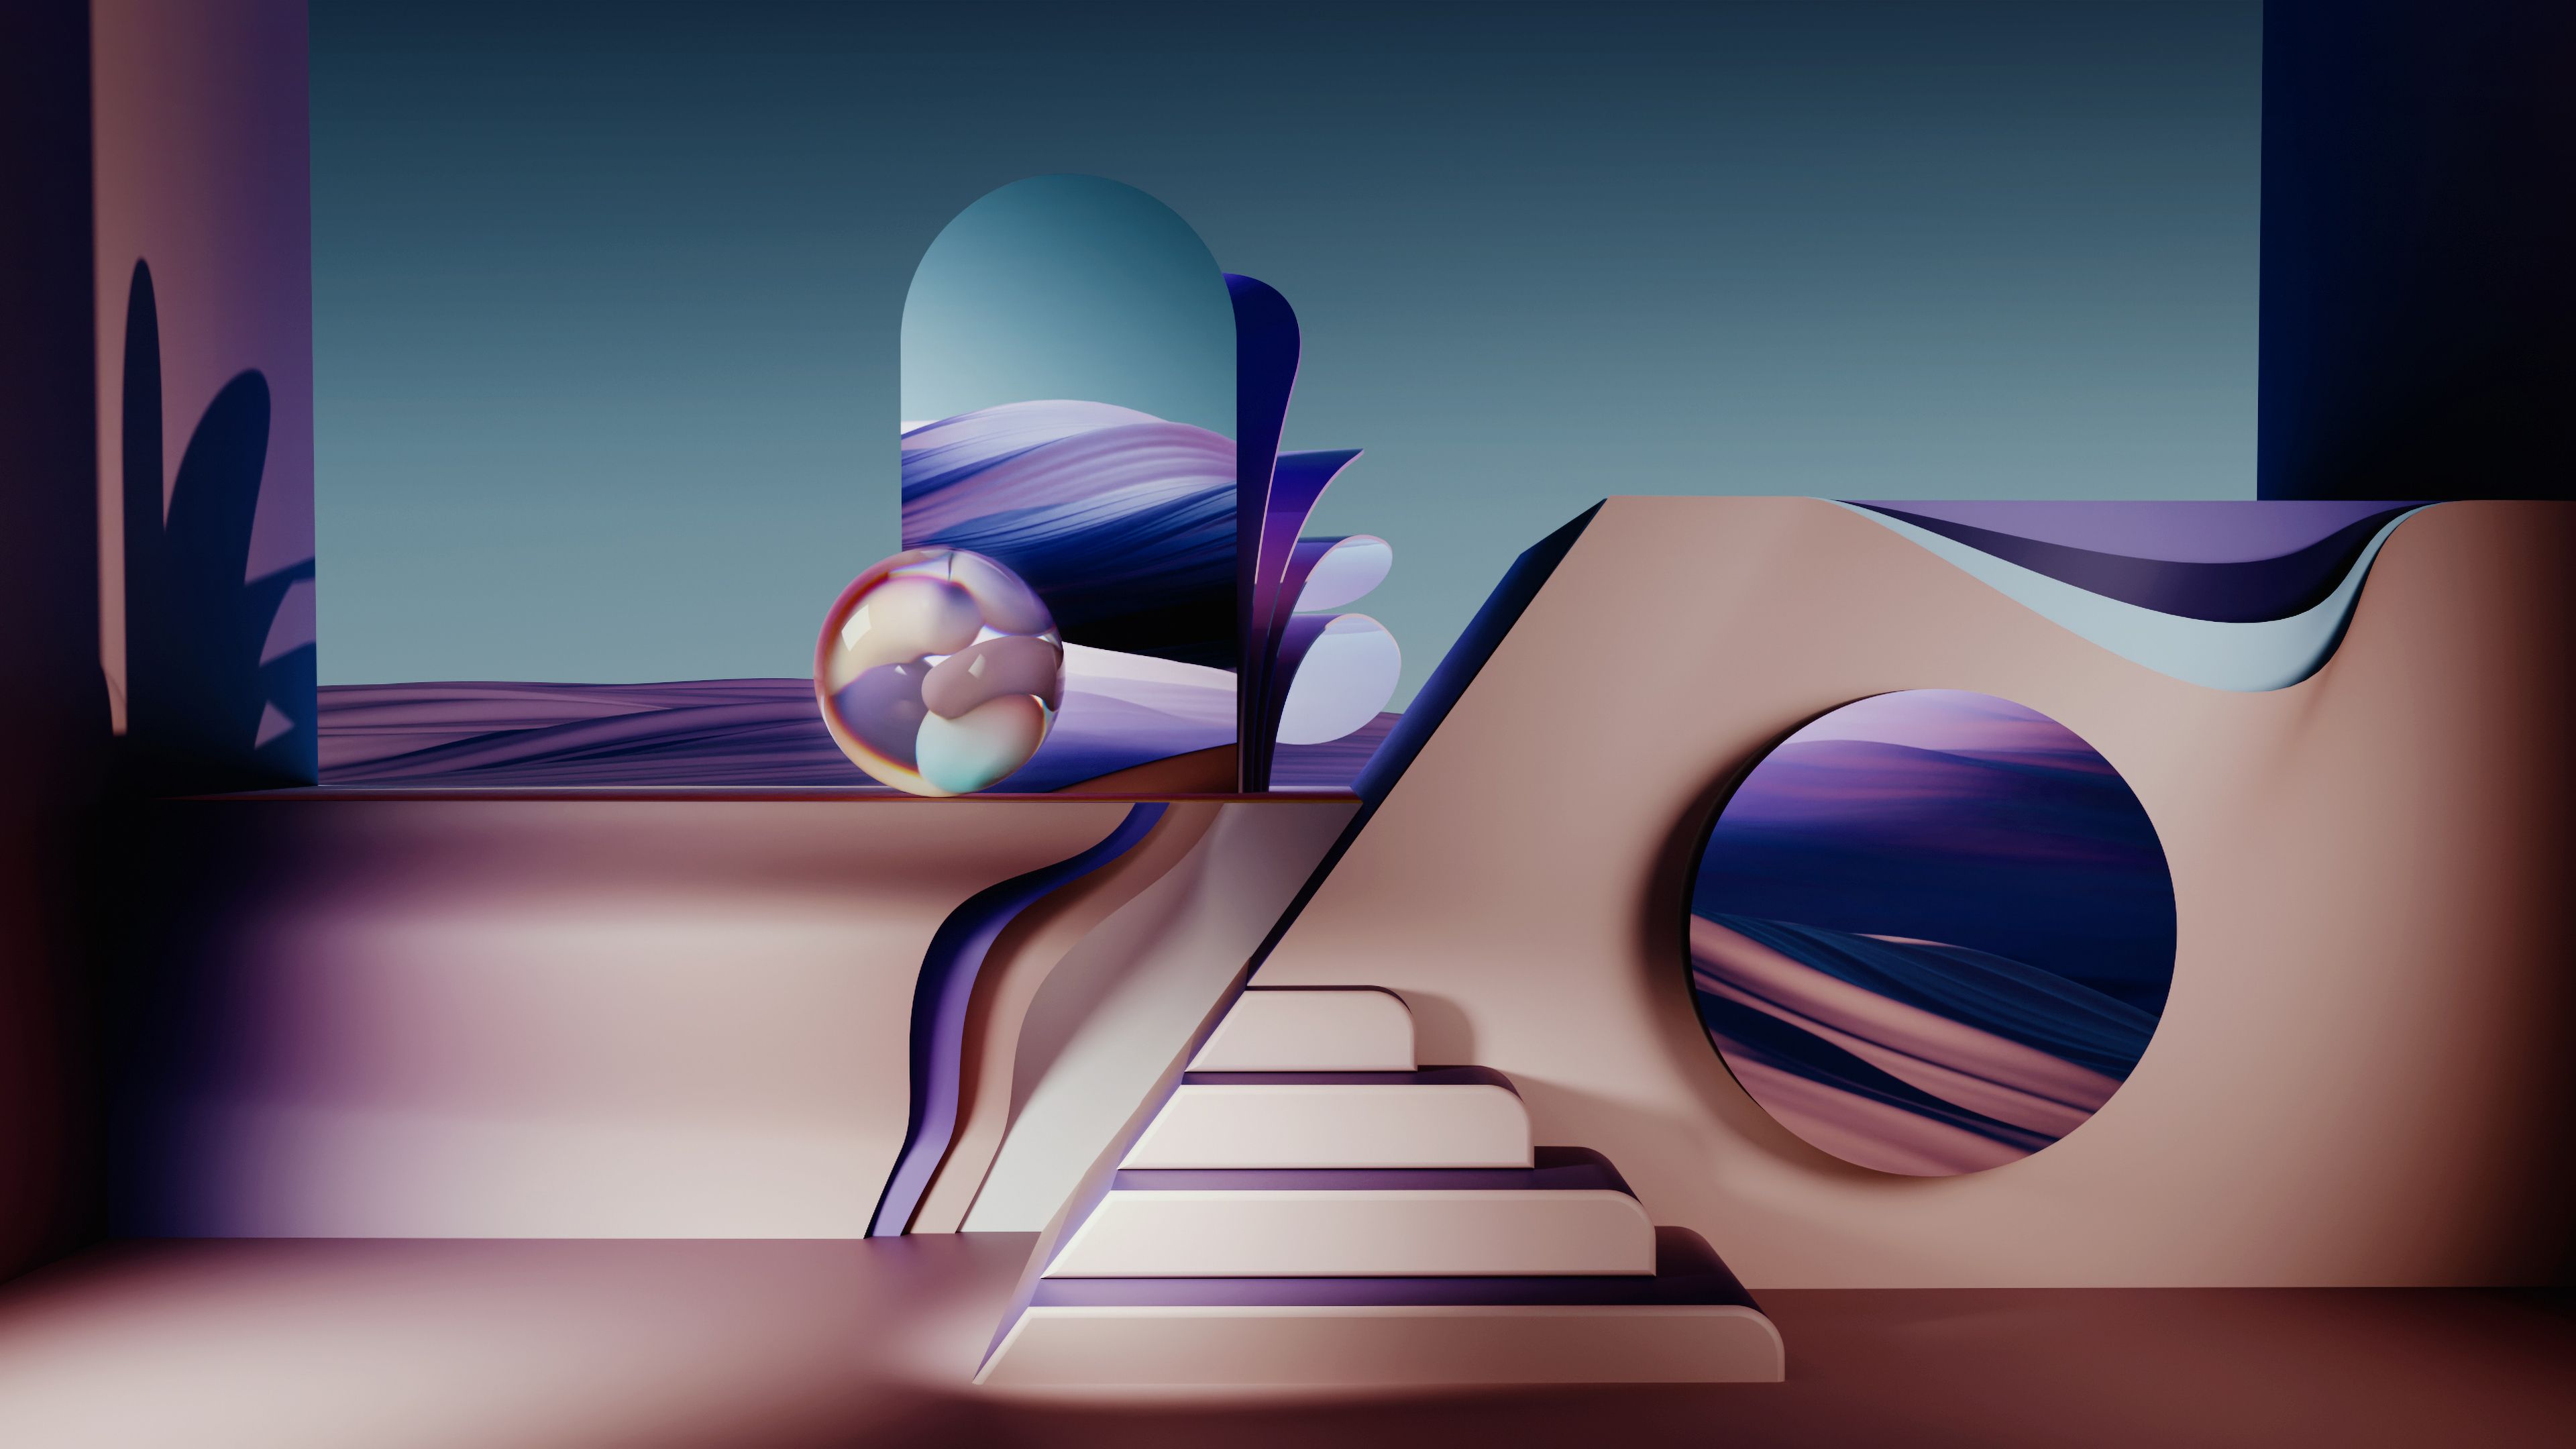 A surreal scene with abstract shapes and colors - 3D